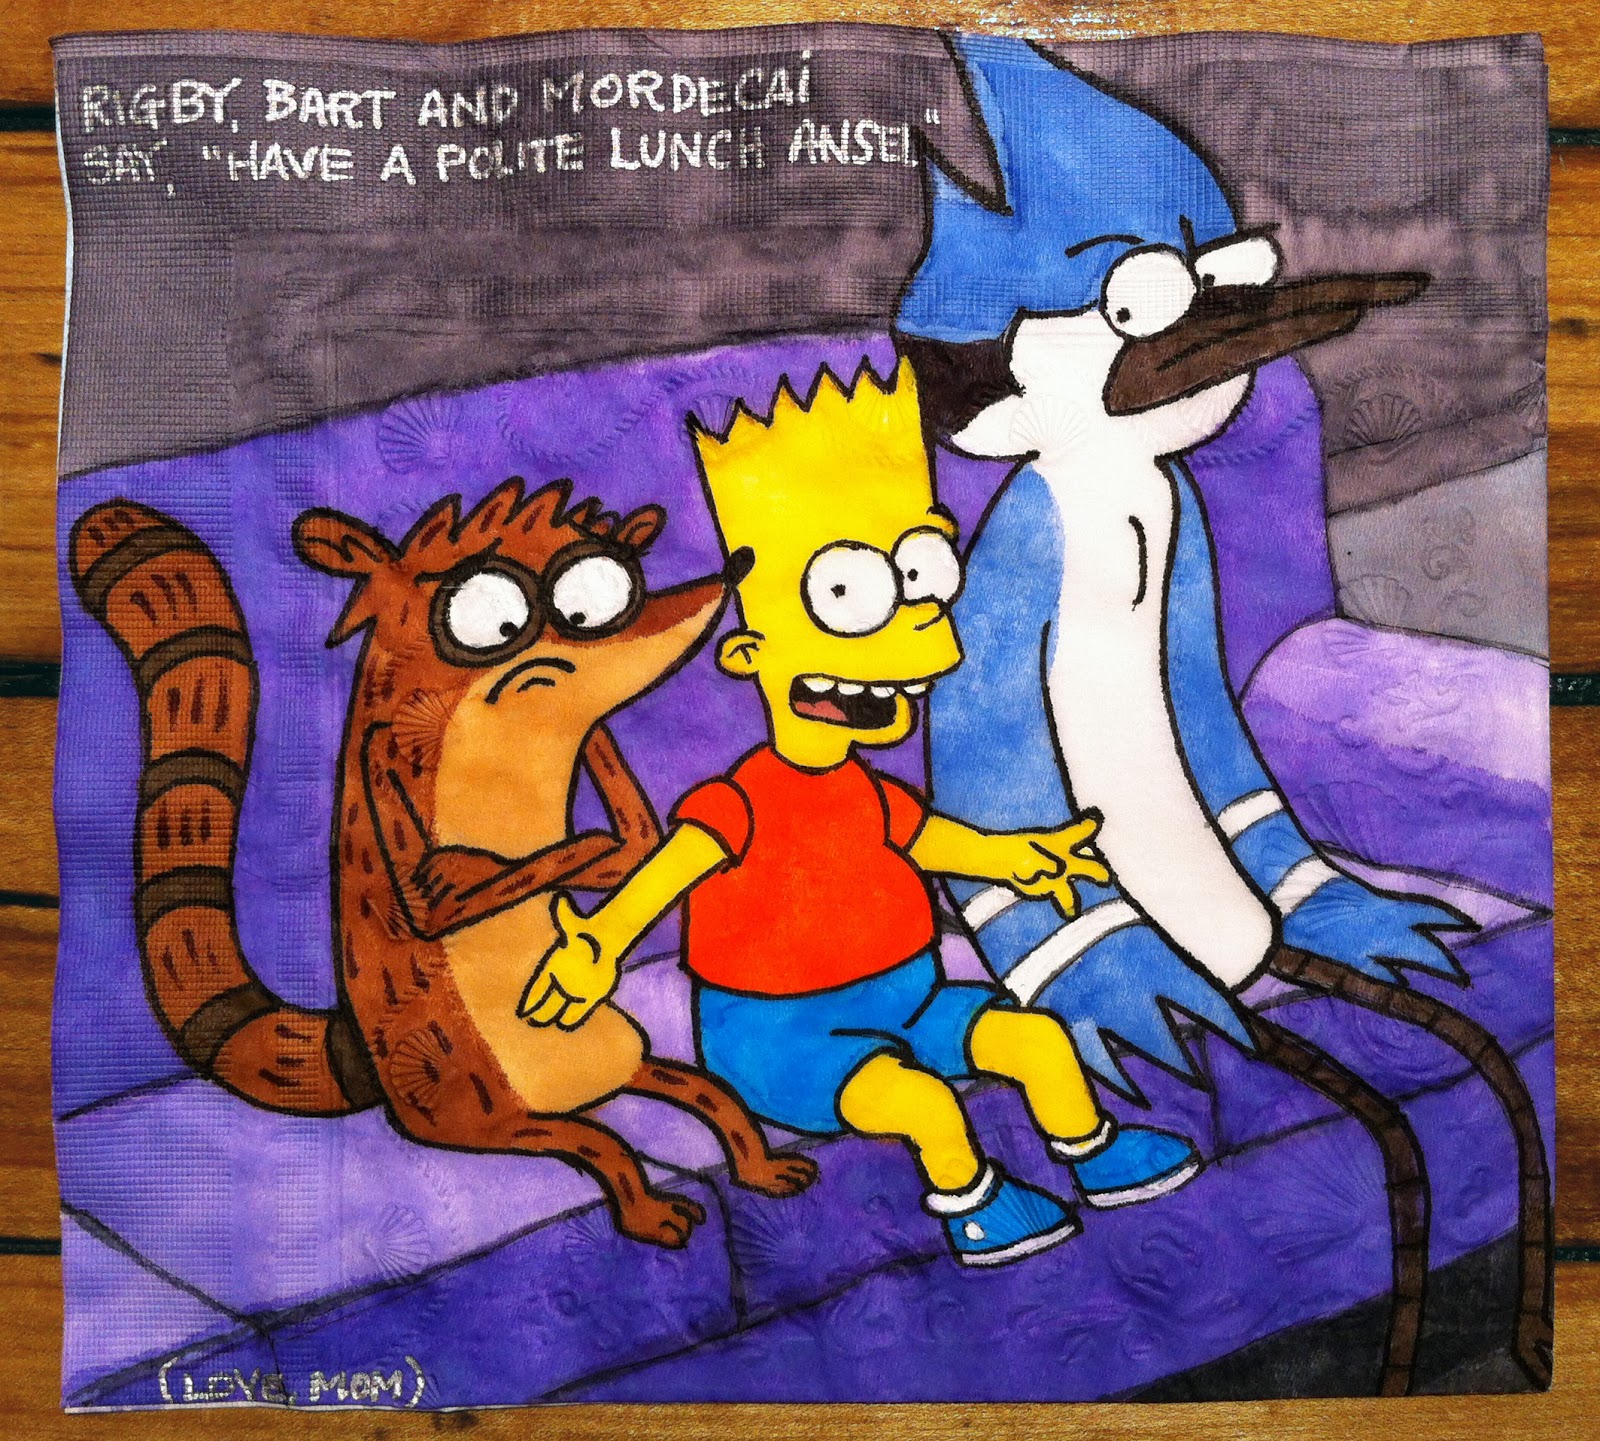 cartoon - Rigby, Bart And Mordecal Say "Have A Polite Lunch Ansel Love Mom